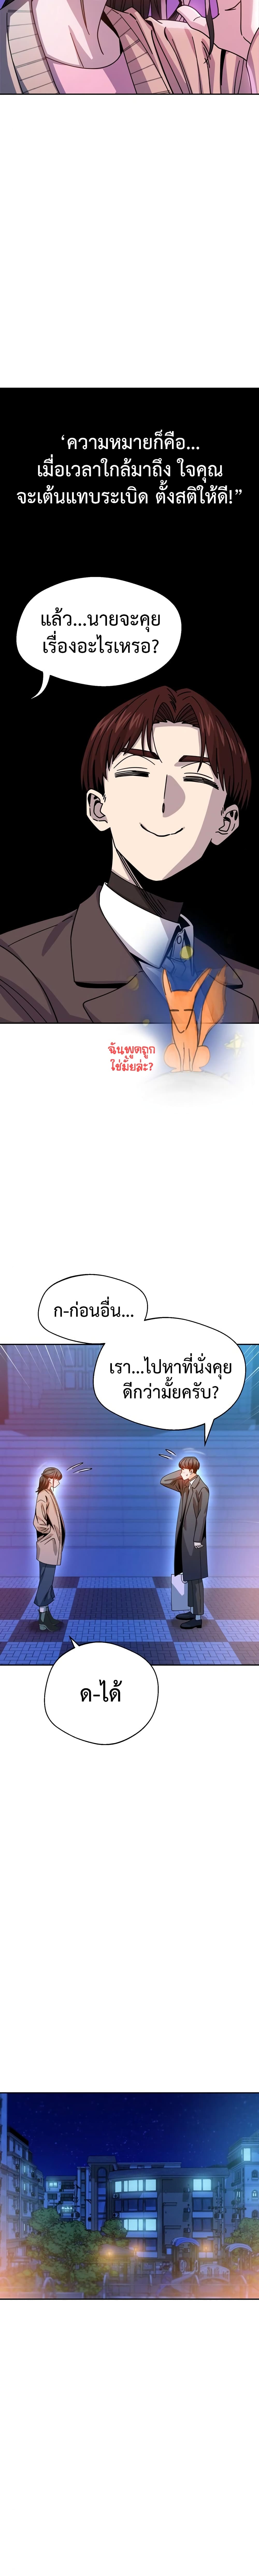 Match Made in Heaven by chance ตอนที่ 19 (8)